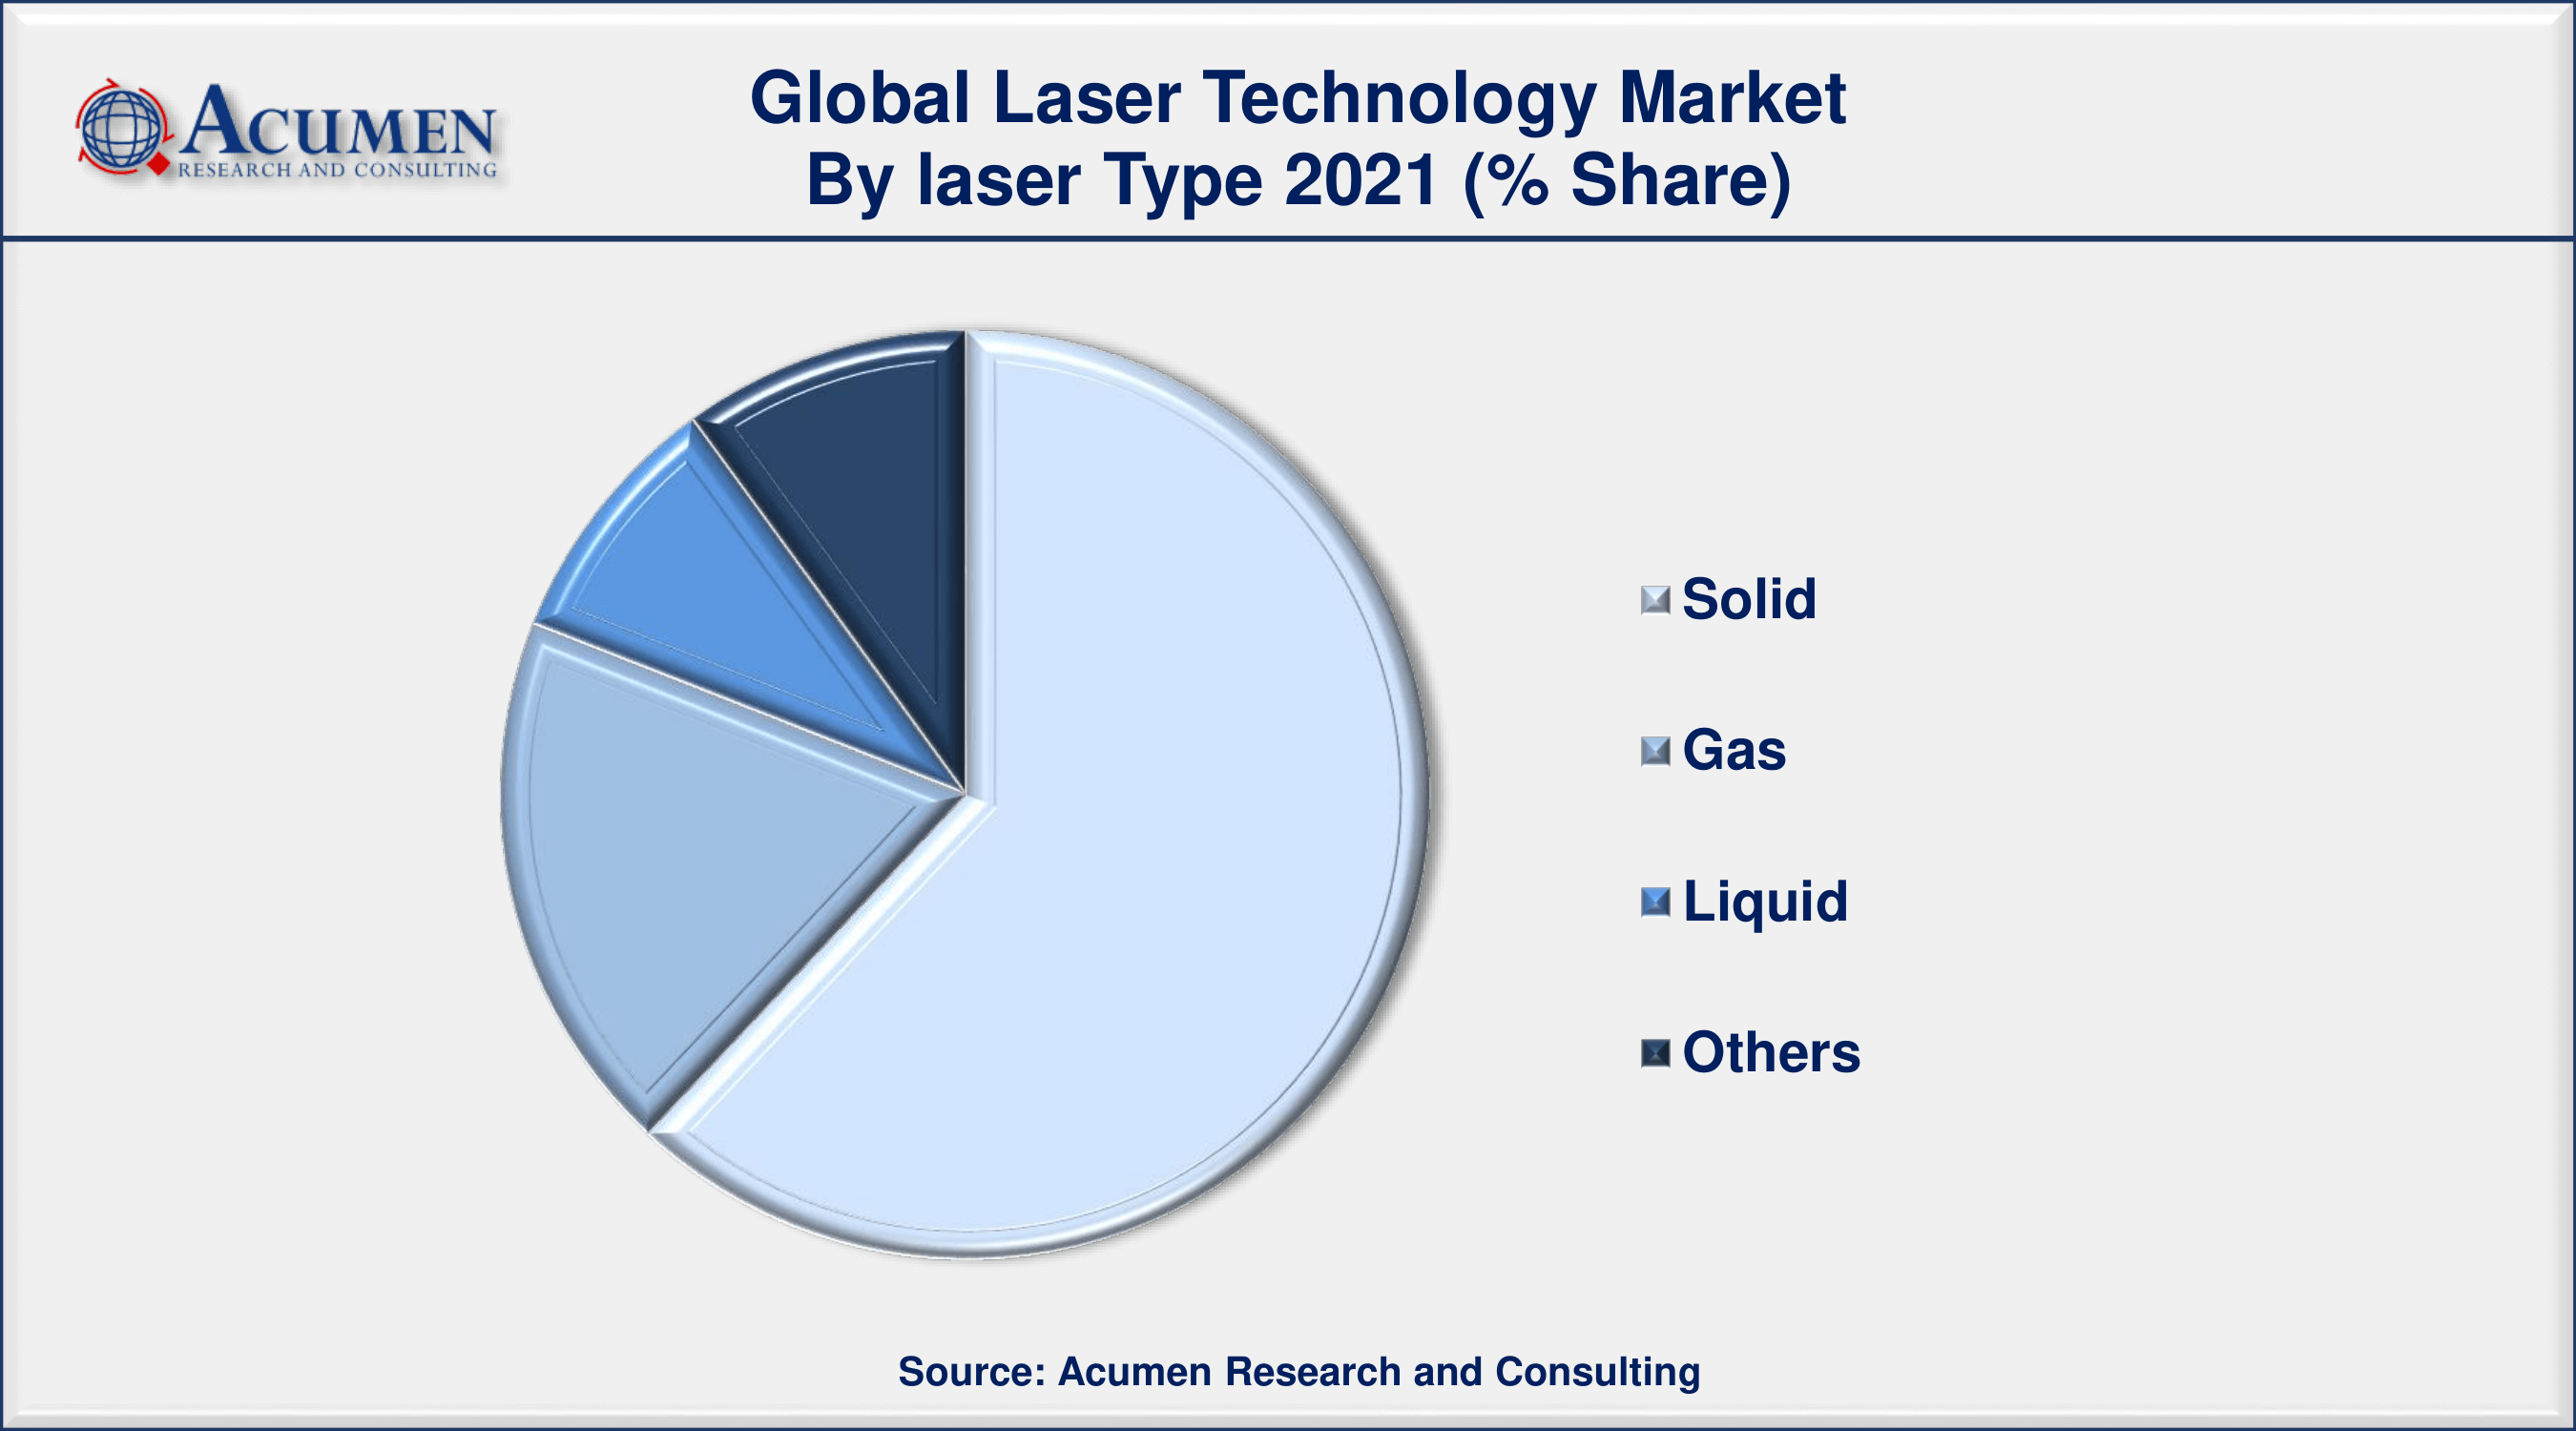 Among laser type, the solid segment contributed 60% market share in 2021